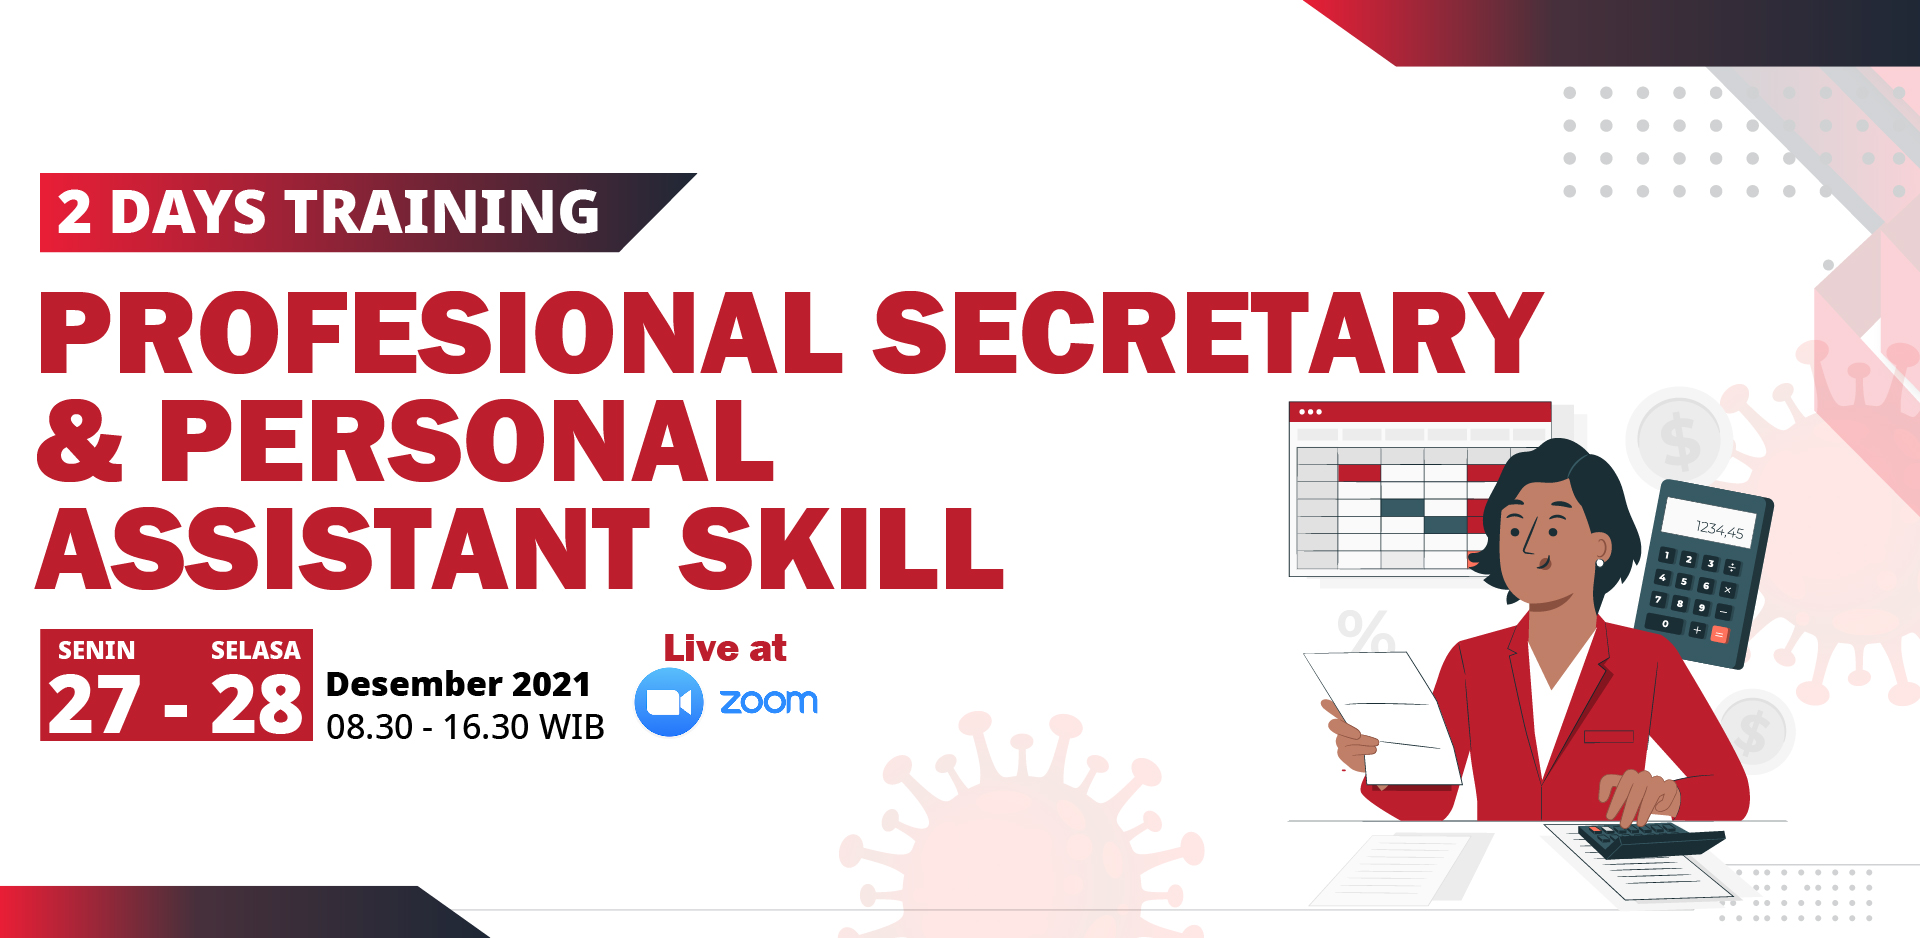 PROFESSIONAL SECRETARY & PERSONAL ASSISTANT SKILL : How To Become A Professional Secretary And Personal Assistant In The Modern Era